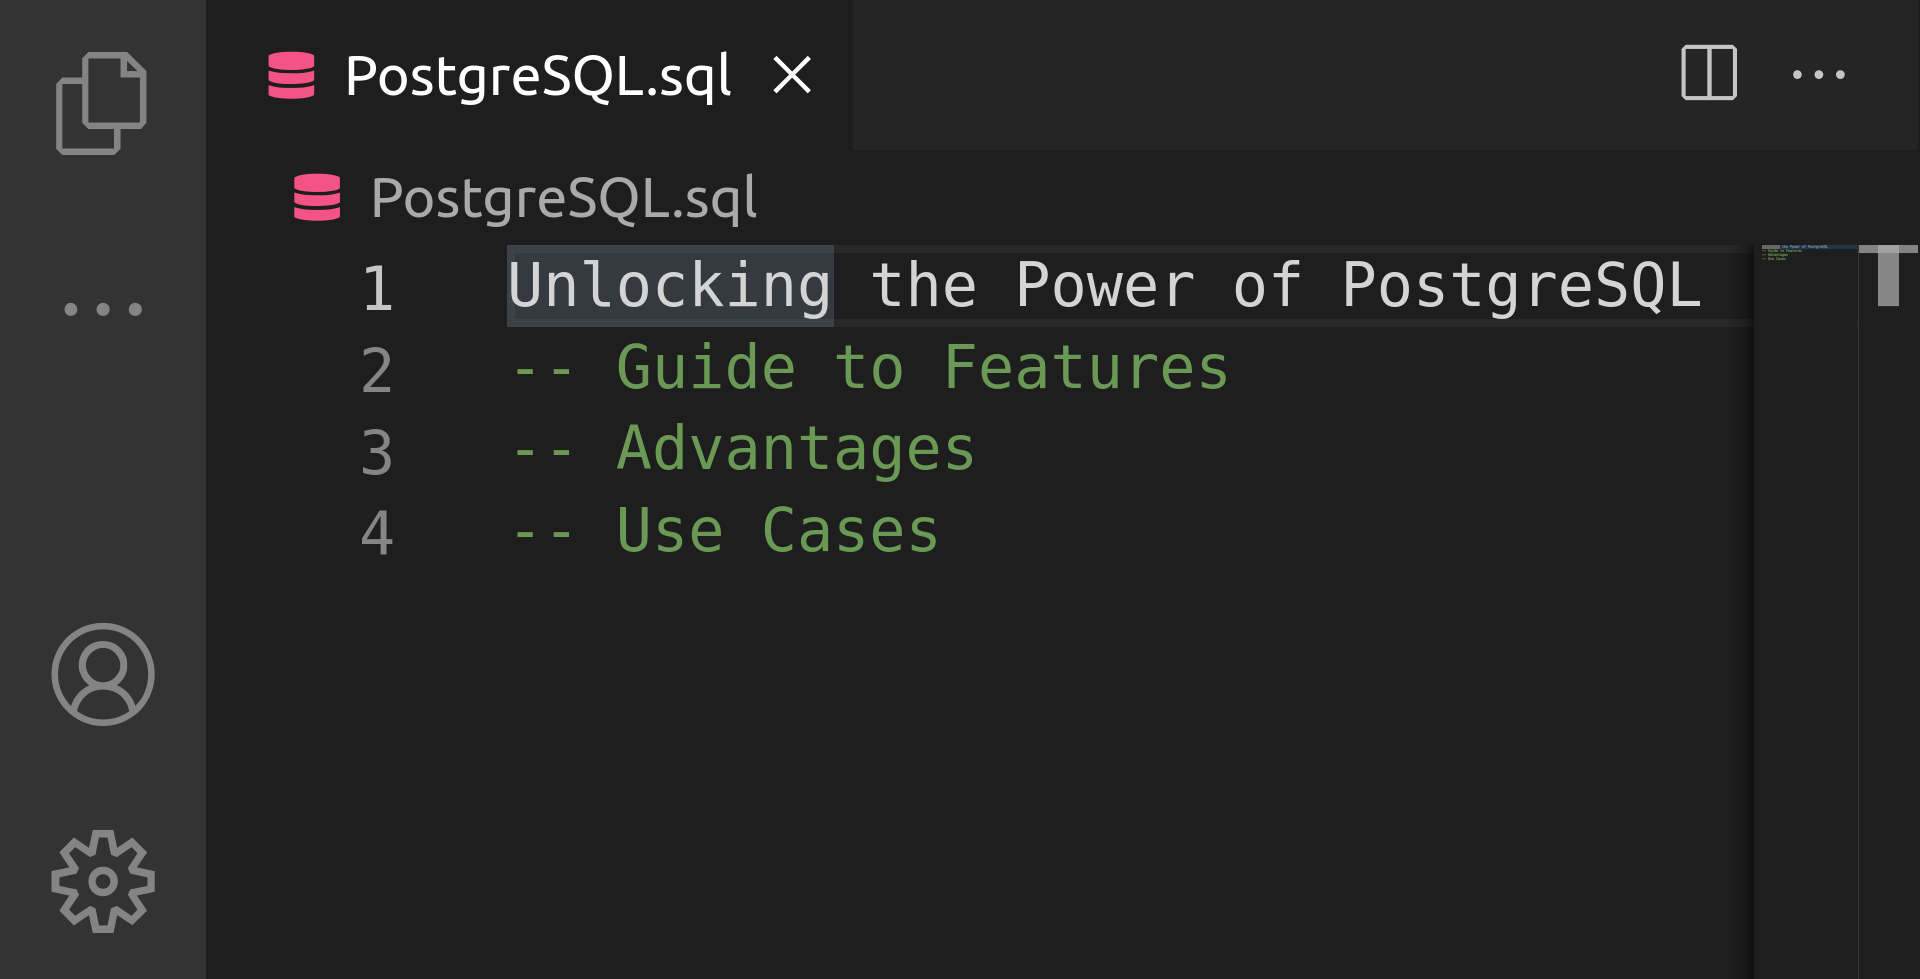 Unlocking the Power of PostgreSQL: Guide to Features, Advantages, and Use Cases